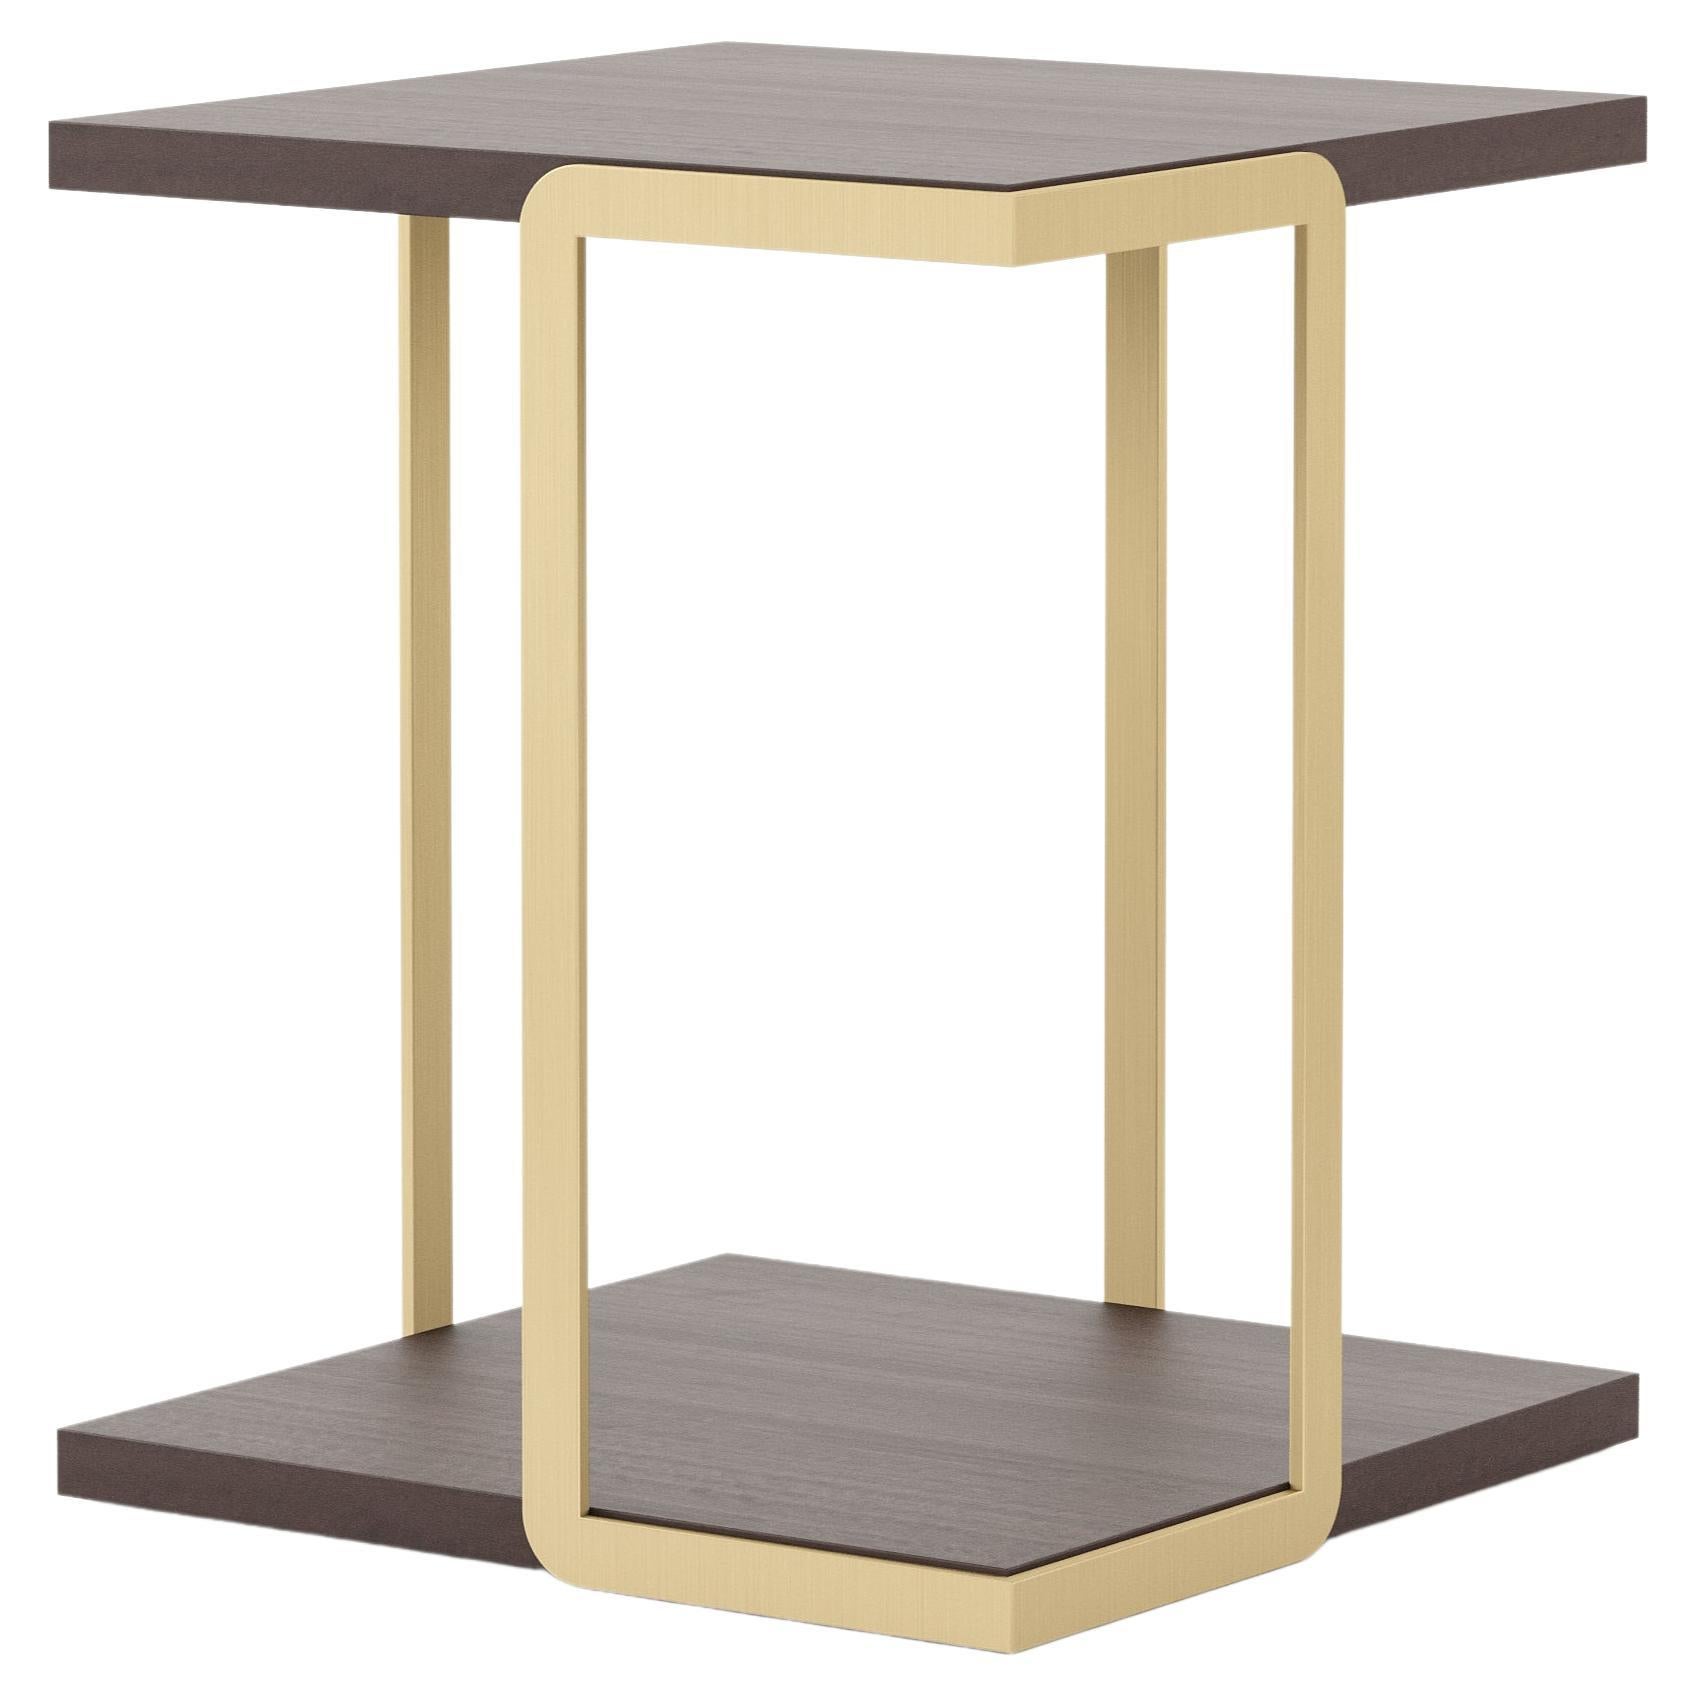 Modern Bridge Side Table made with wood and brass, Handmade by Stylish Club